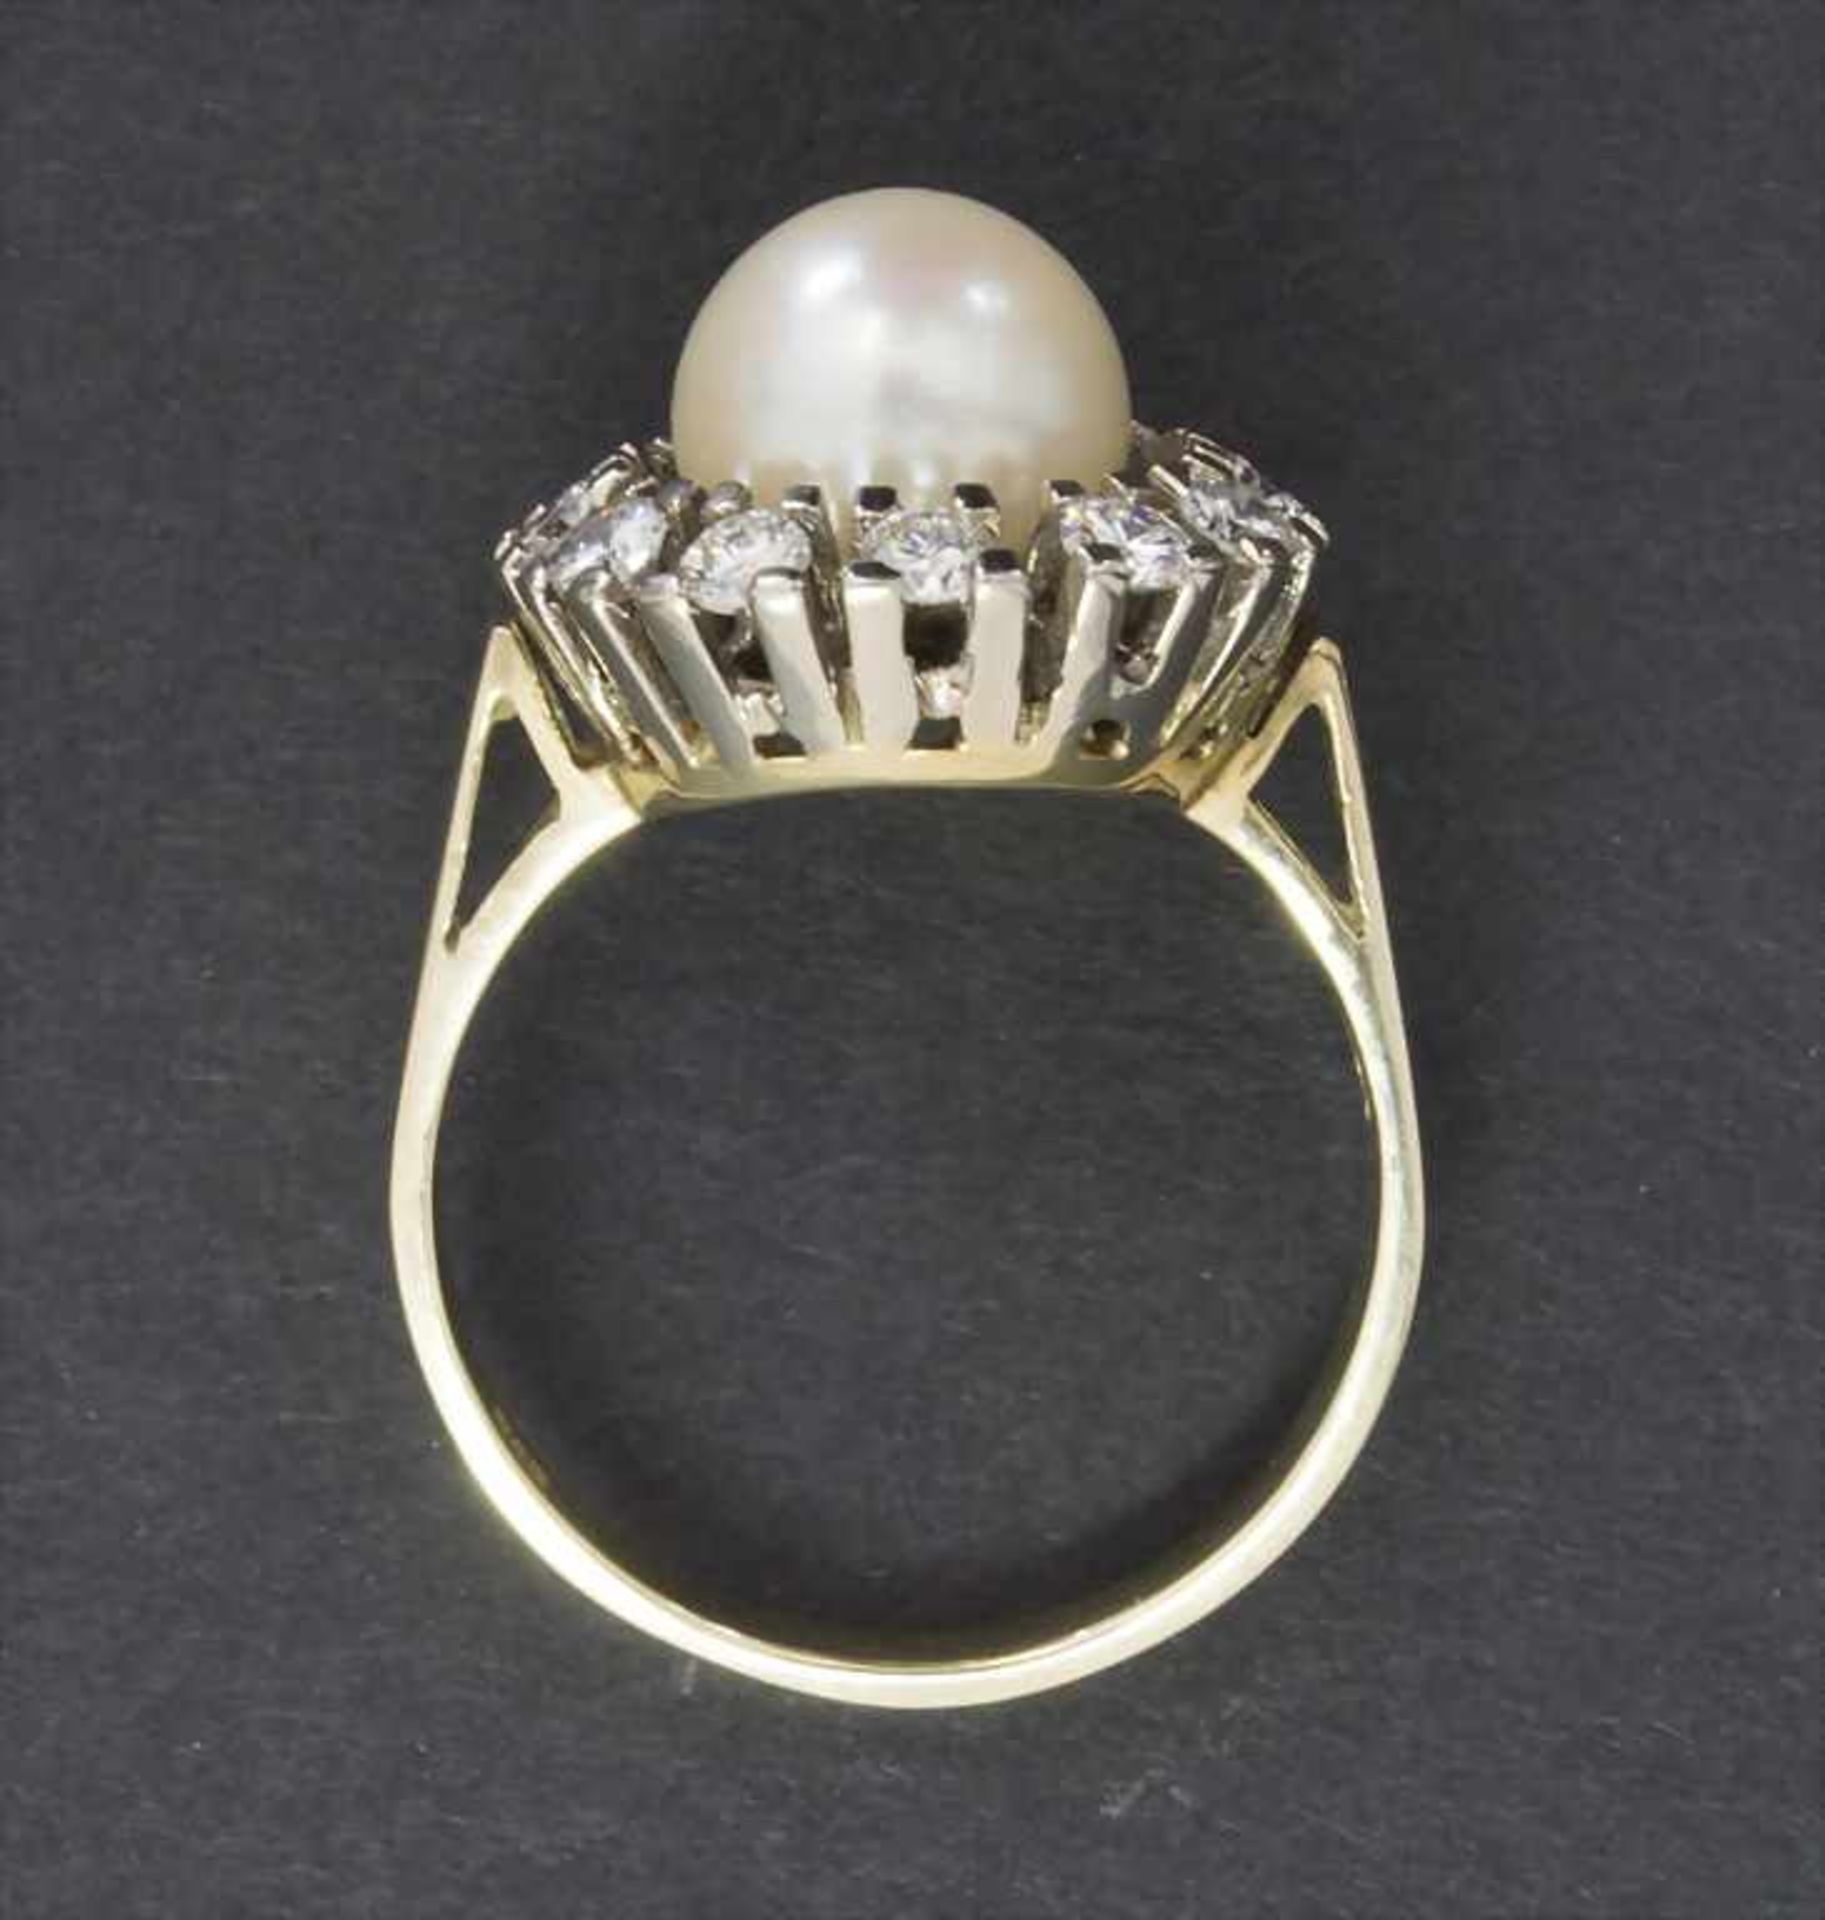 Damenring mit Brillanten und Perle / A ladies ring with brilliants and pearl - Image 3 of 3